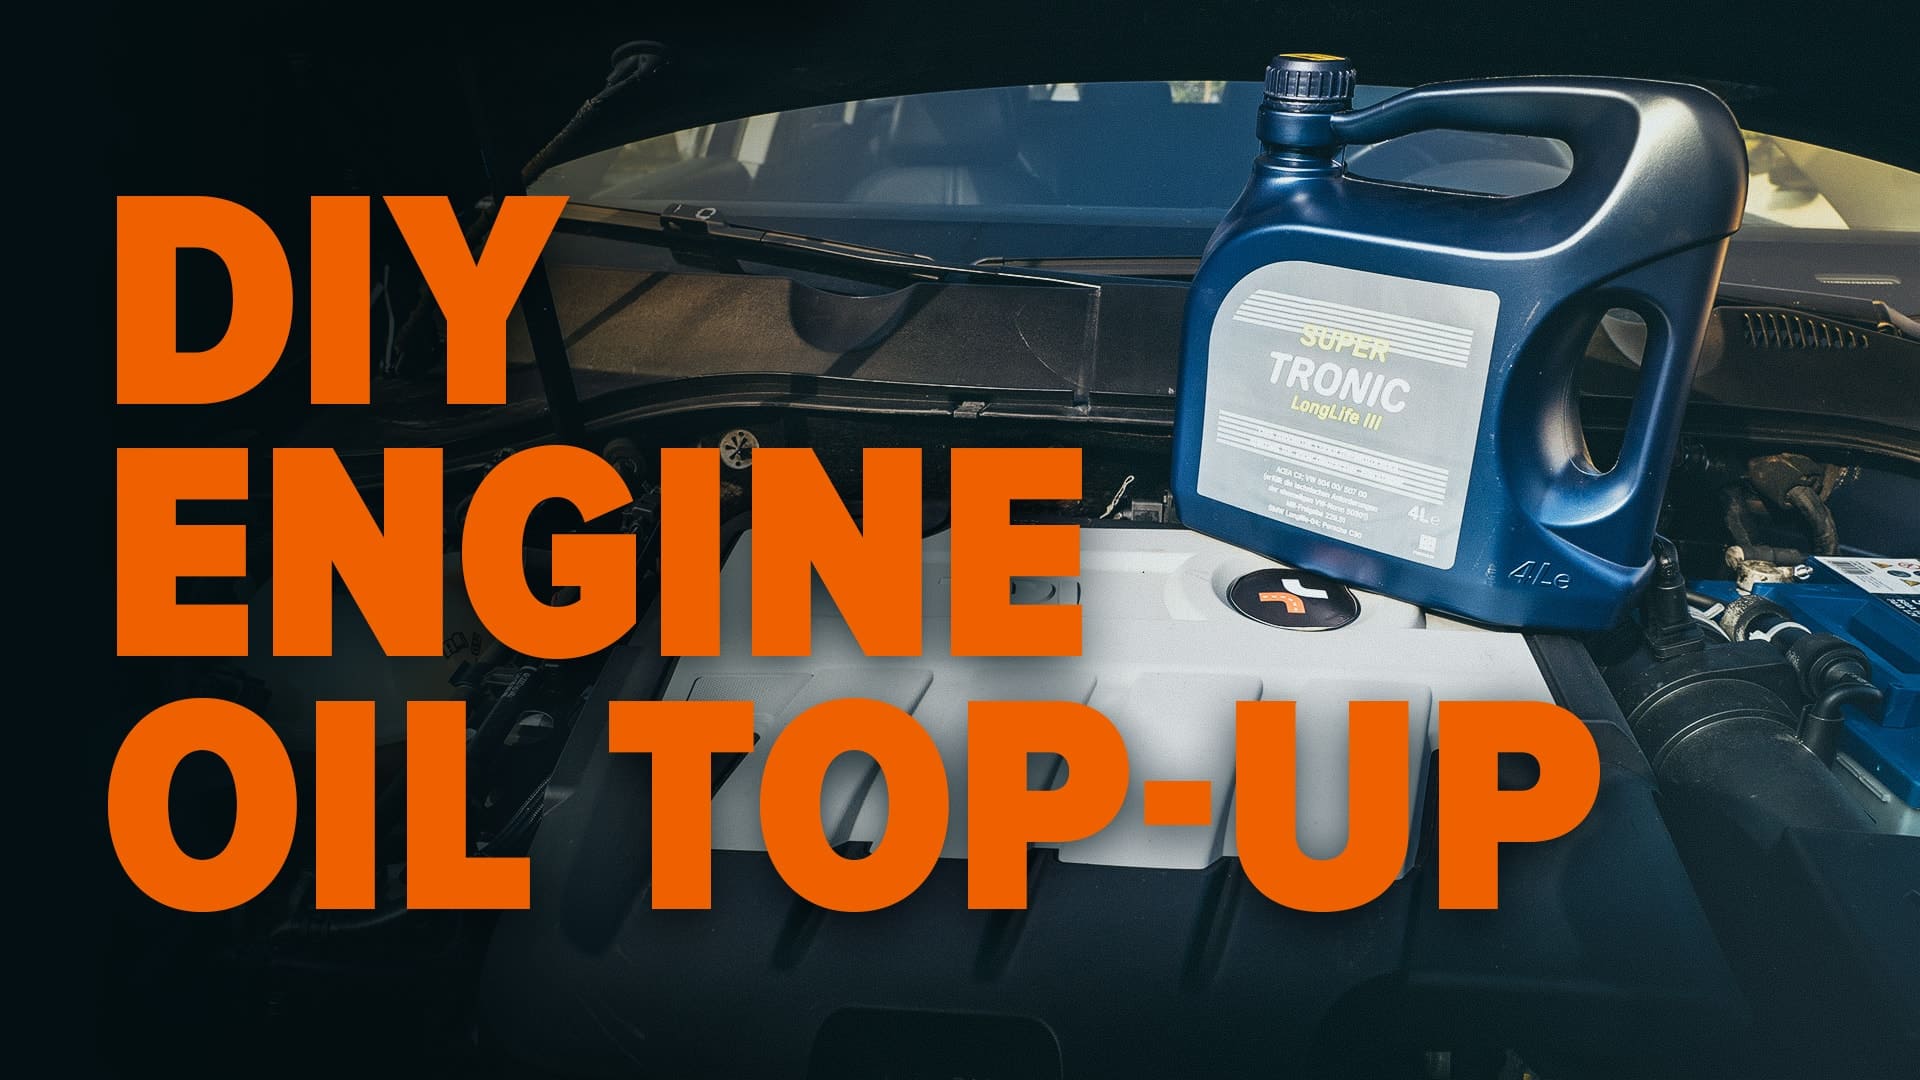 How to top up engine oil yourself — What happens if you underfill or overfill the oil?